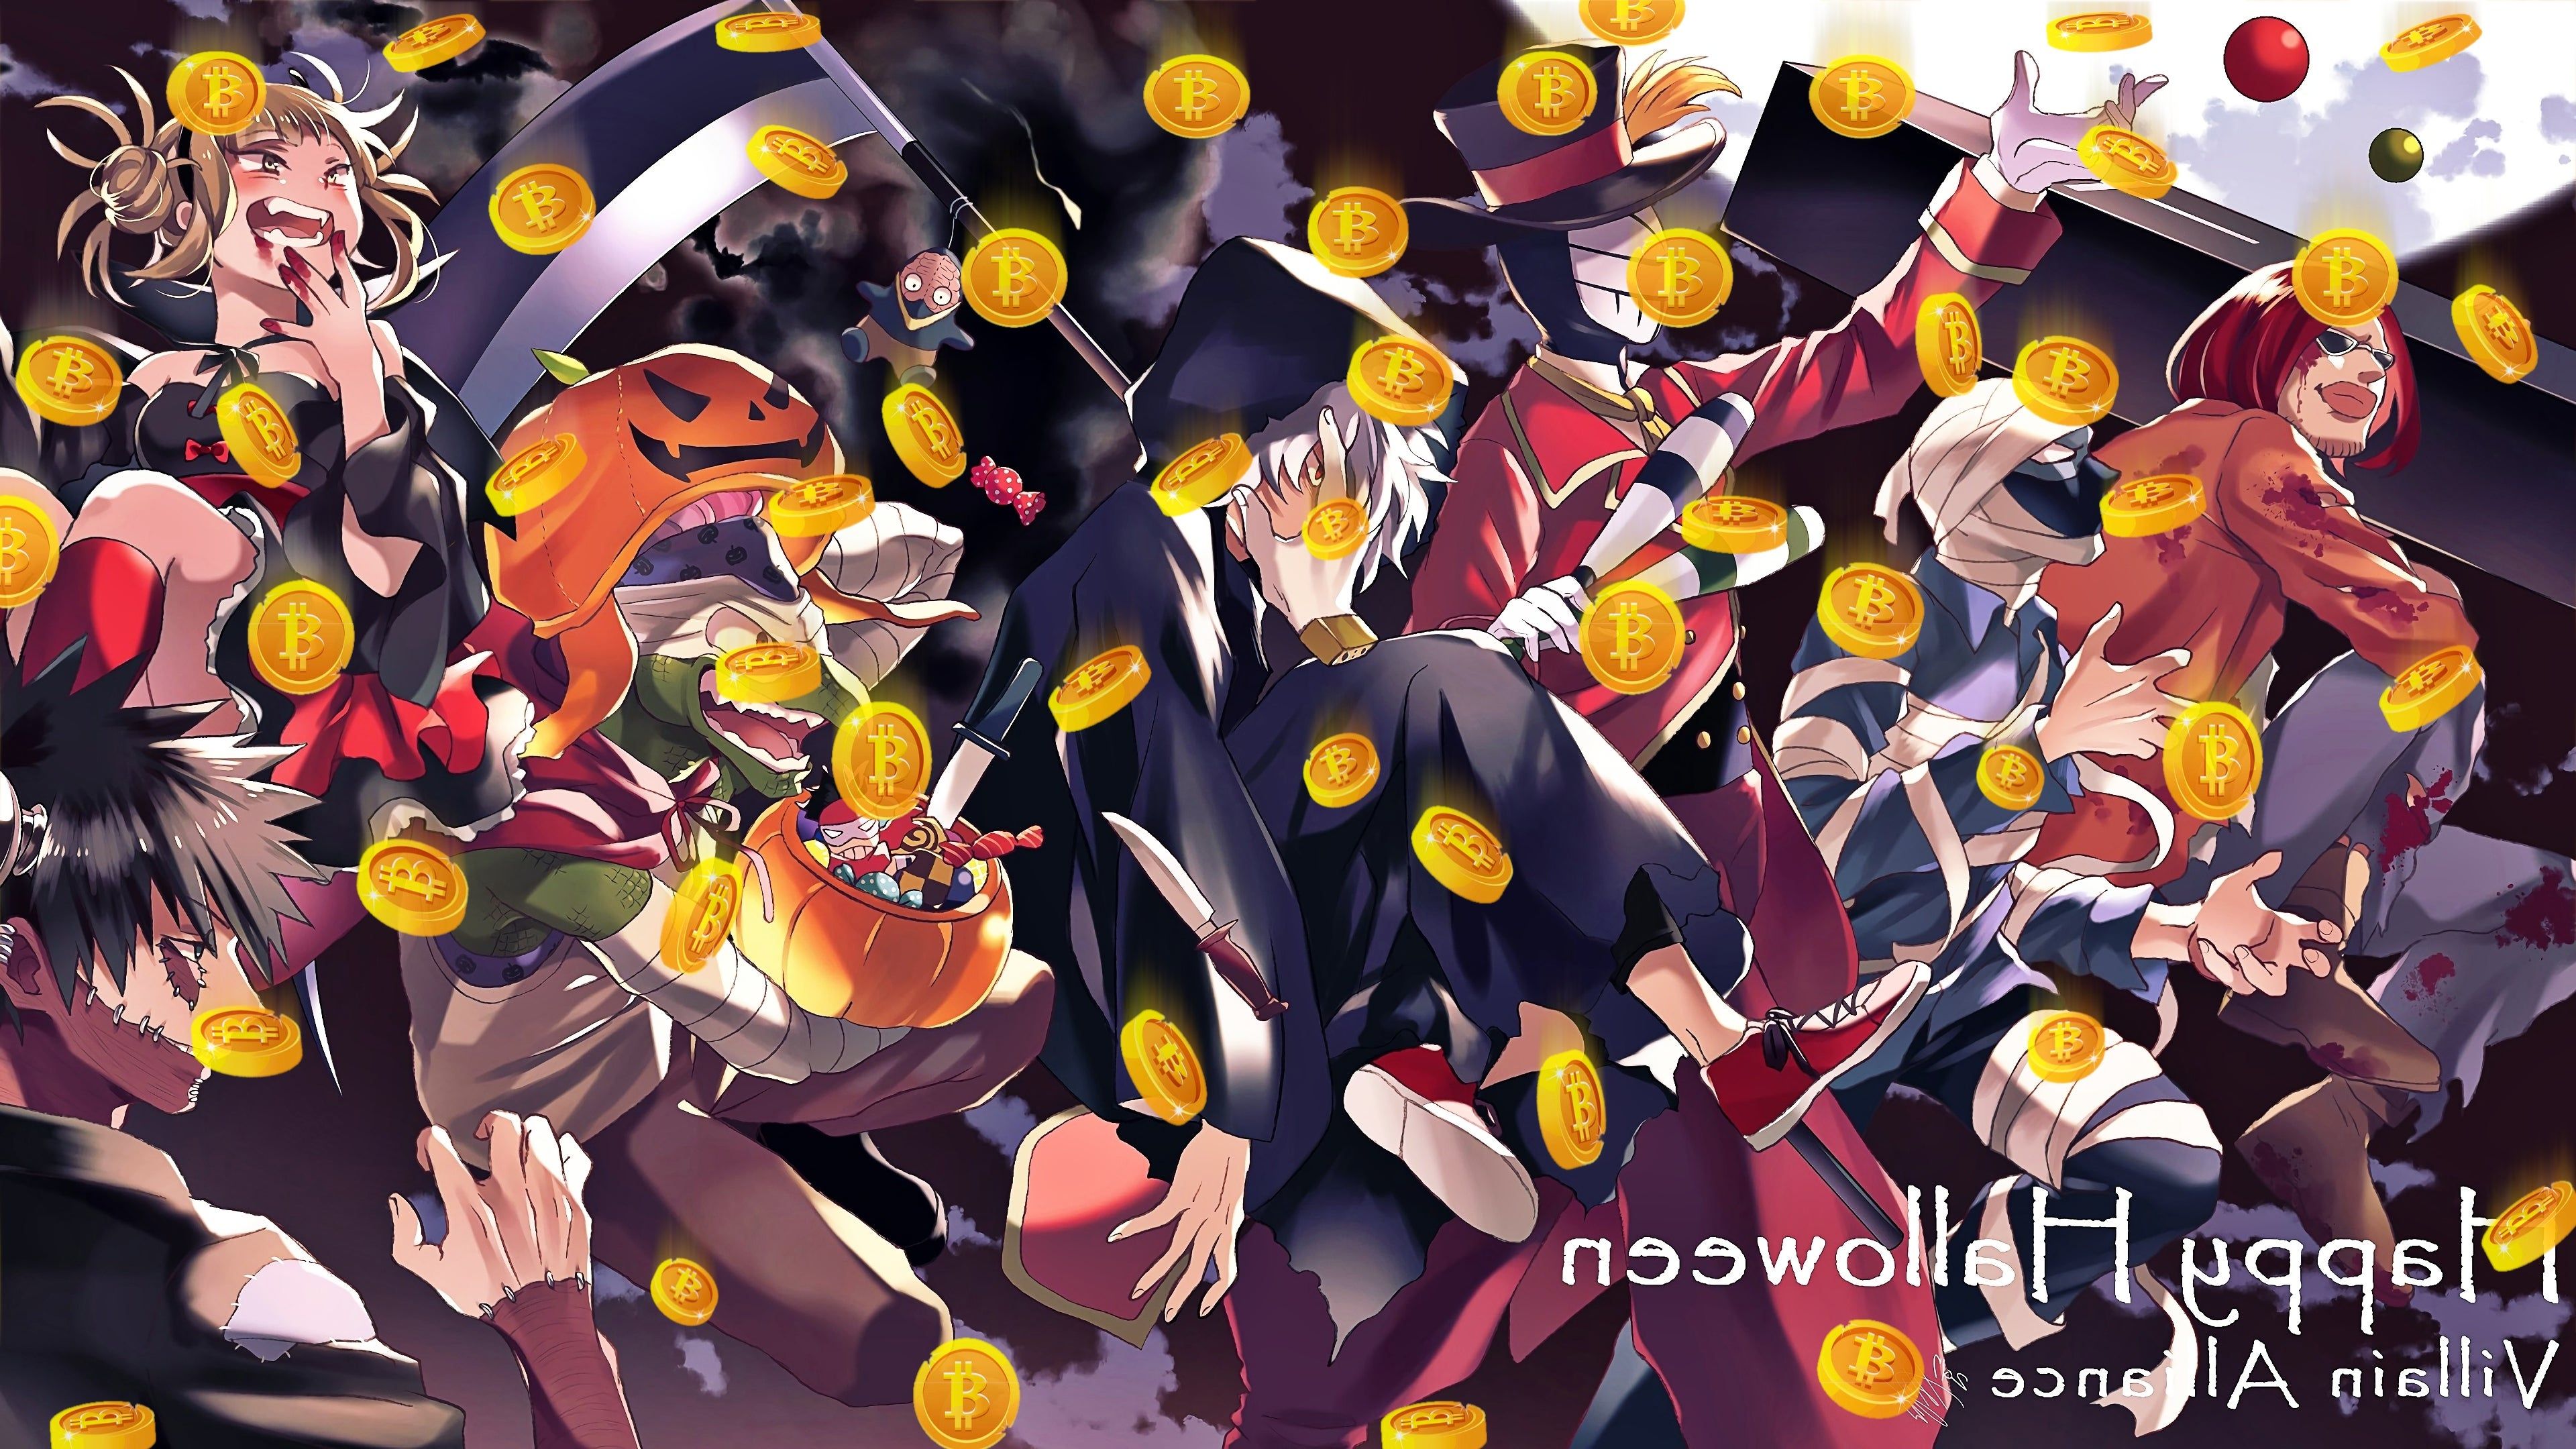 Bitcoins From Above My Hero Academia League Of Villains Vanguard Action Squad Happy Halloween 69171 Wallpaper